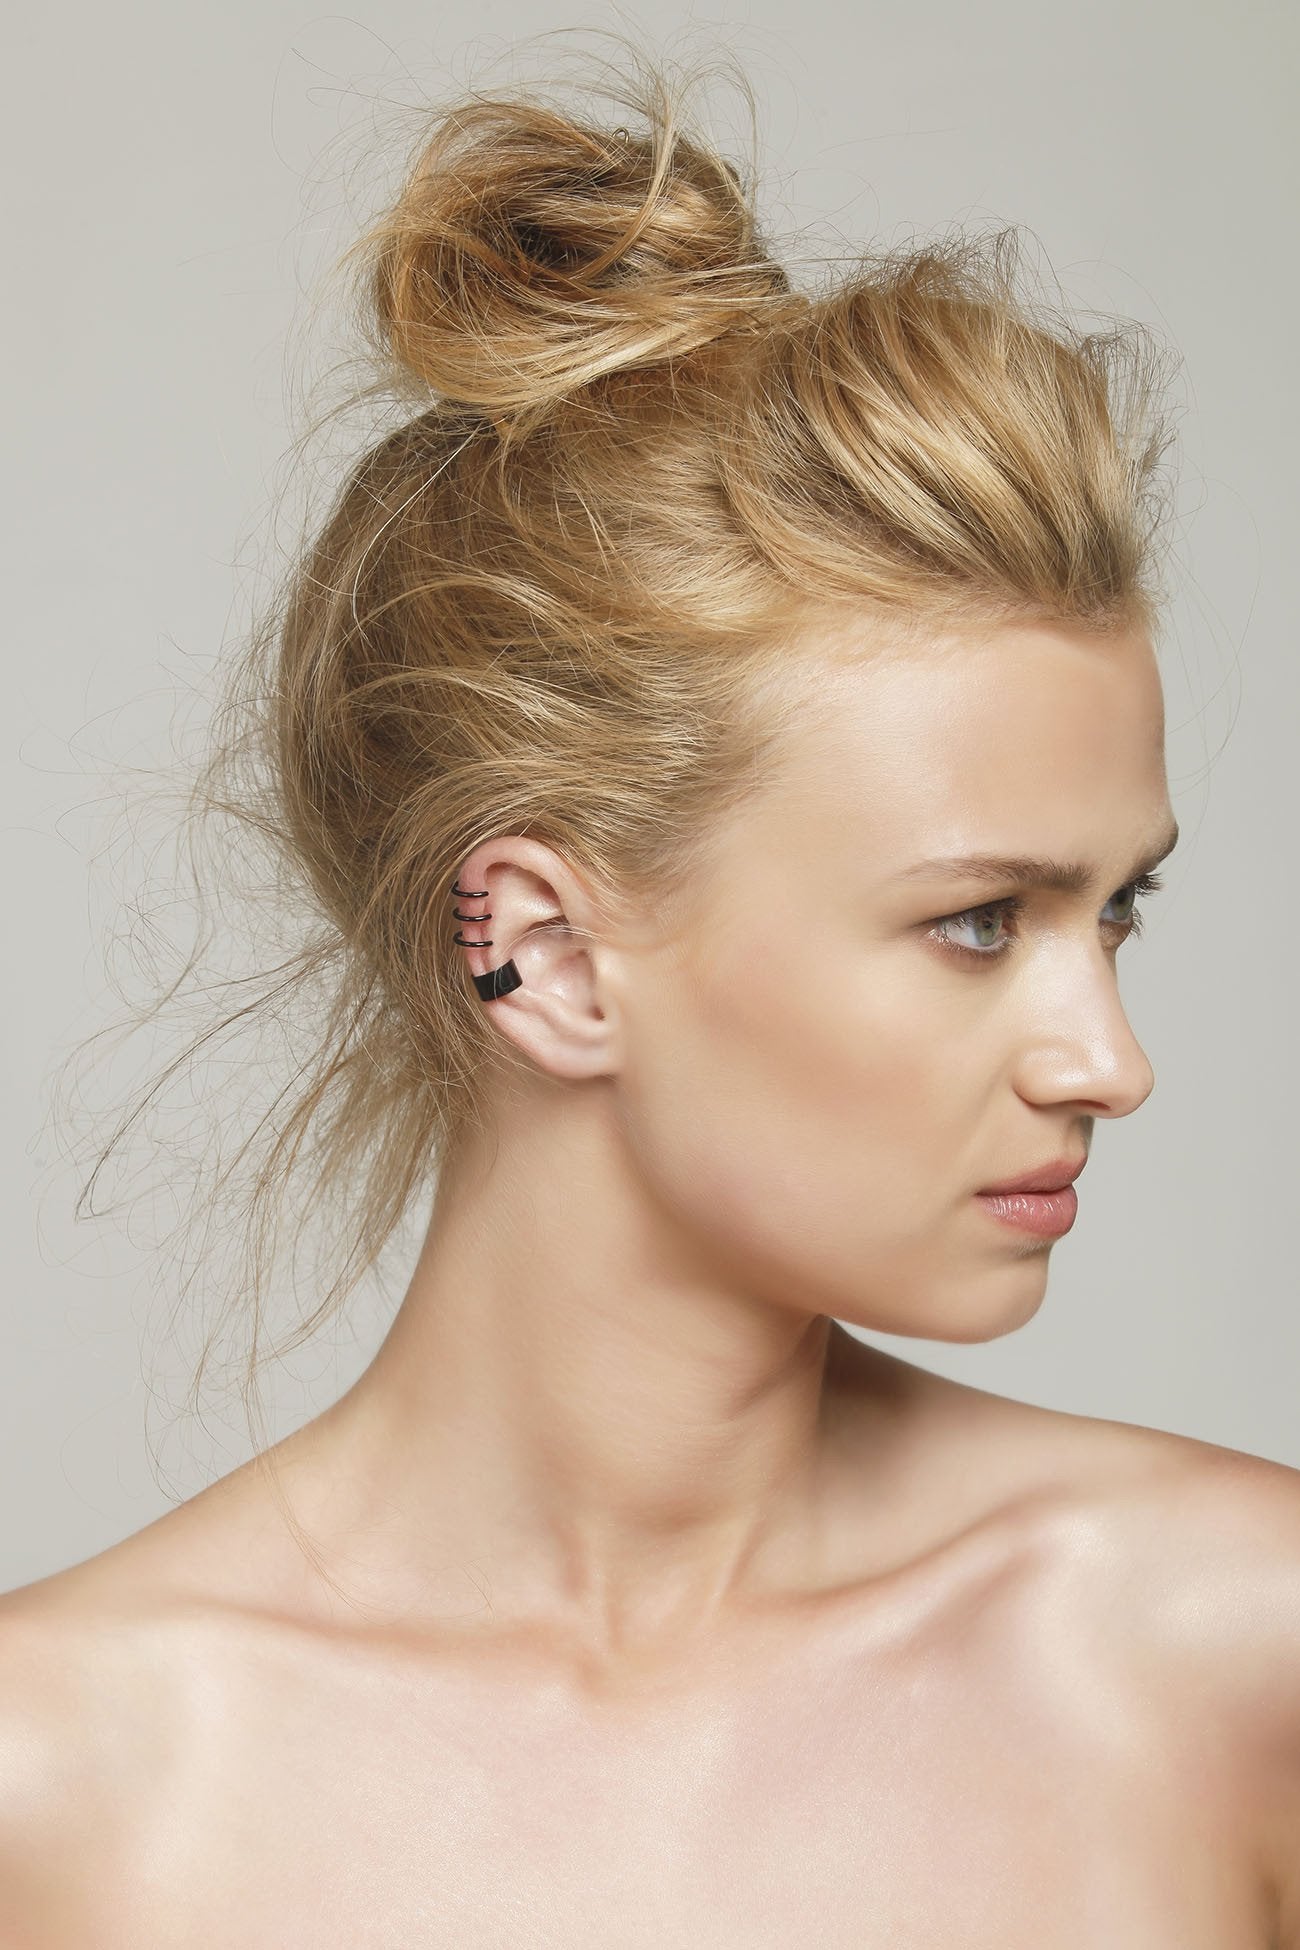 Basic Ear cuff - Boutique Minimaliste has waterproof, durable, elegant and vintage inspired jewelry